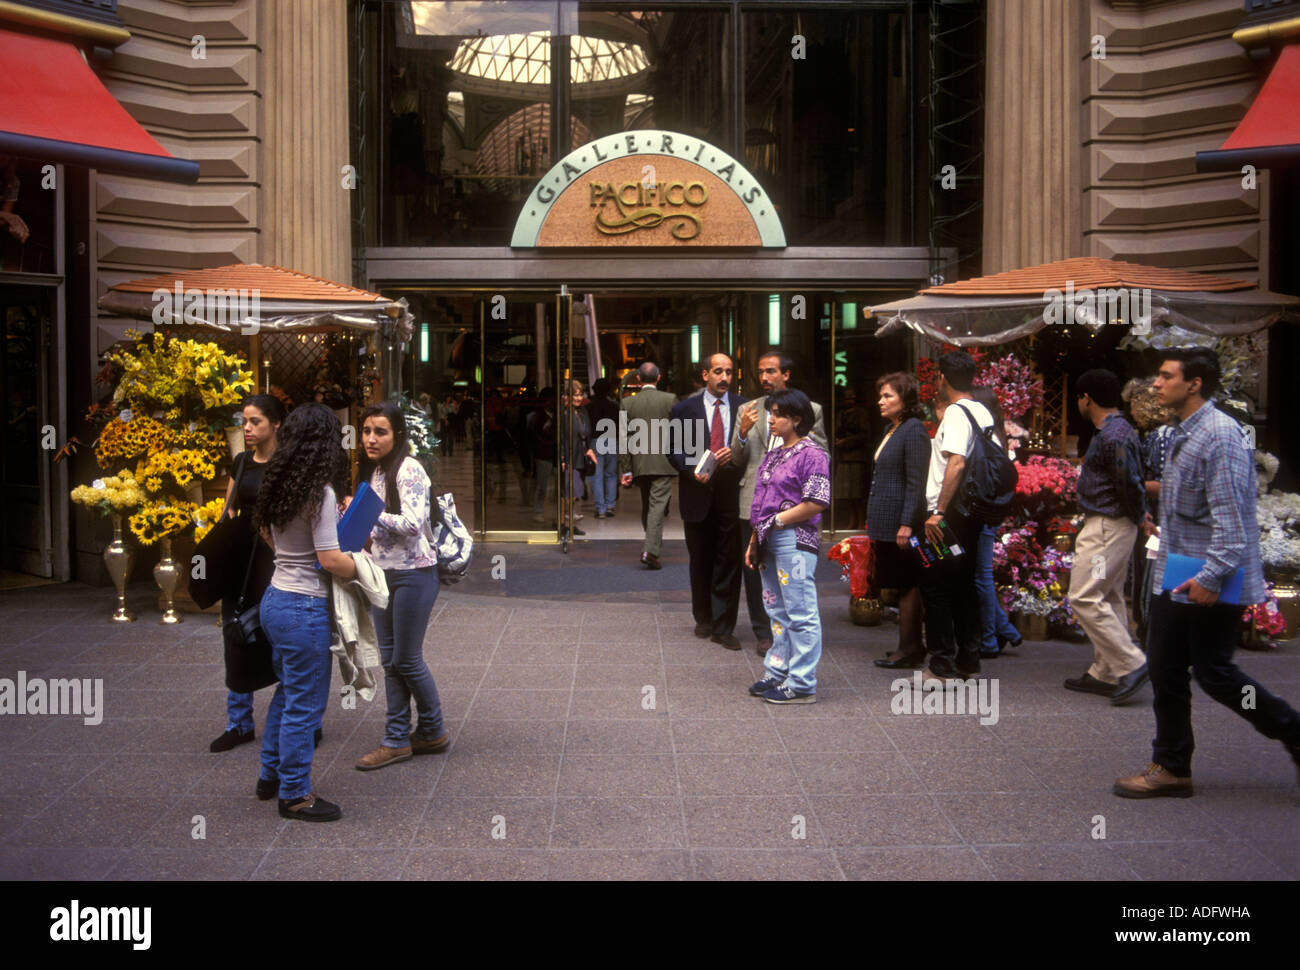 Popolo argentino, shoppers, shopping, Galerias Pacifico Shopping Mall, Calle Florida, Buenos Aires, Provincia di Buenos Aires, Argentina, Sud America Foto Stock